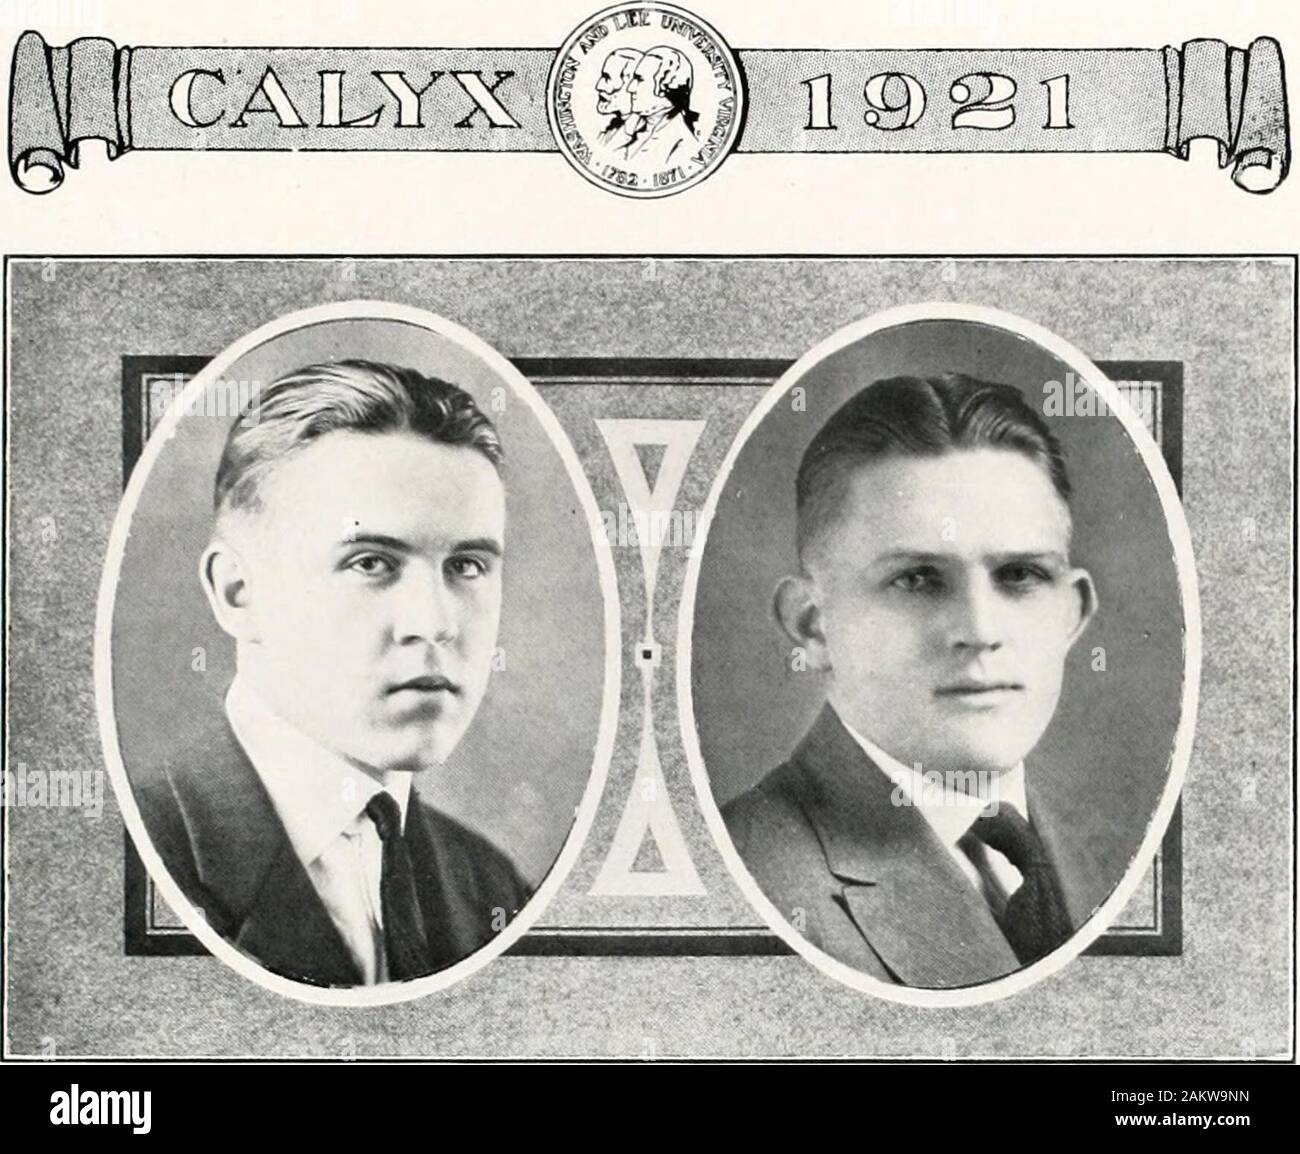 Calyx . ton and I.,ee can fur-nish them thought for imly three years. Pos-sessing all the (|ualities of friendship and cordial-ity reputed to liae belonged to the old Ken-tucky colonel of the last century. Miller cameto us in 191S. Since that time he has workedhard, his work being rewarded by the attain-ment of a degree in only three years. During the short time that he has been here,he has made many friends and has been at everyopportunity all that a good friend should betowards his friends. .lthough a considerableamount of his time has been spent in the chemicallaboratory where he is doing Stock Photo